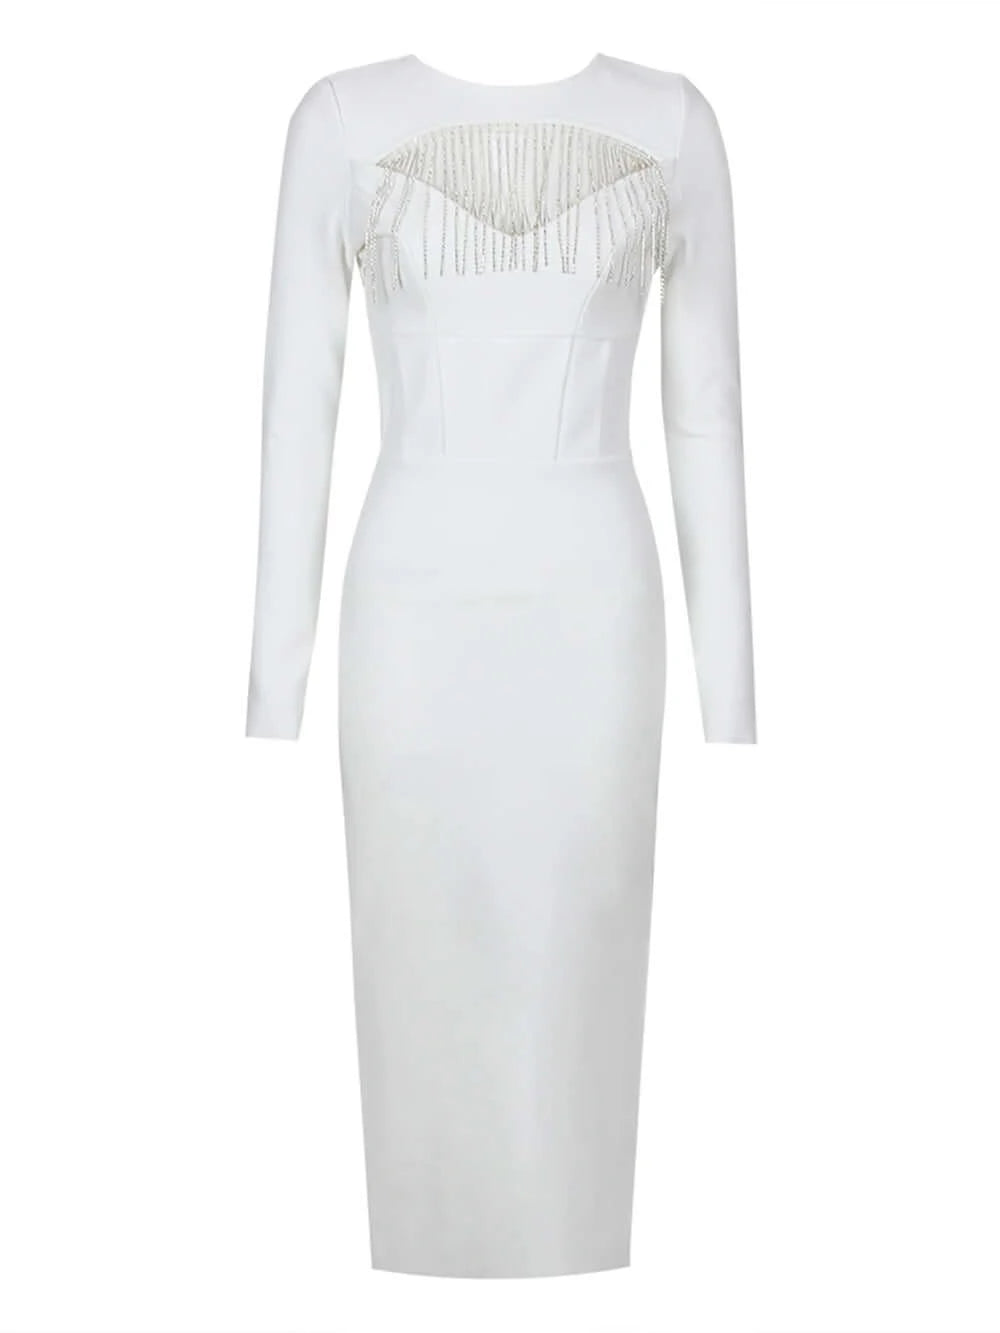 White Long Sleeves Bandage Dress With Crystal Tassels